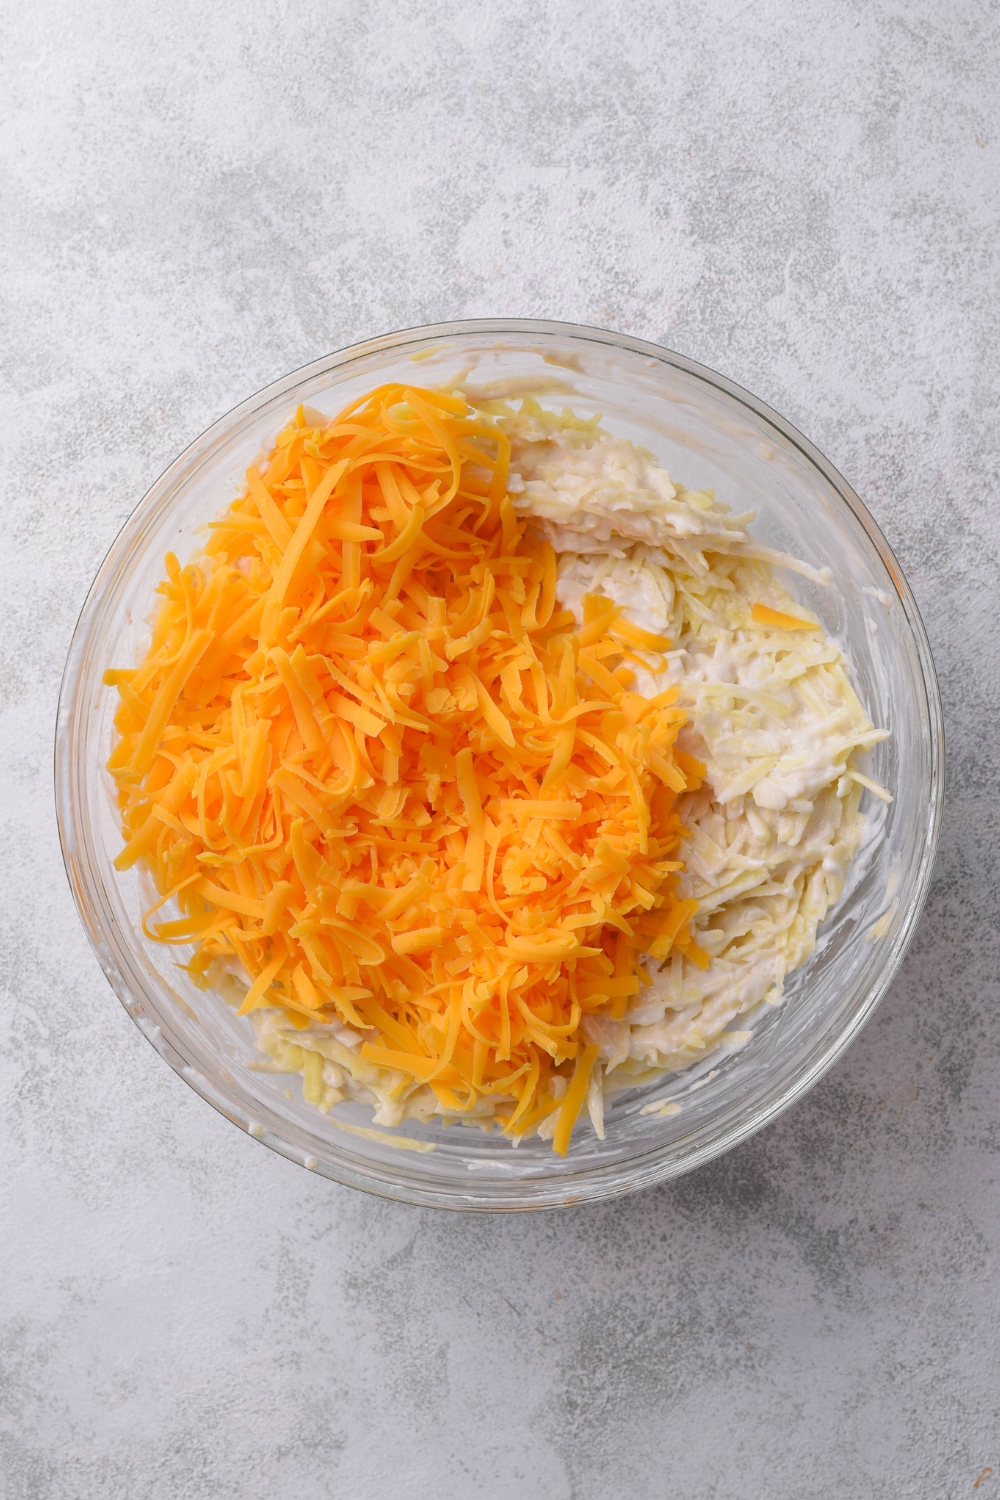 A mixing bowl with the hashbrown mixture and the shredded cheese added to it.